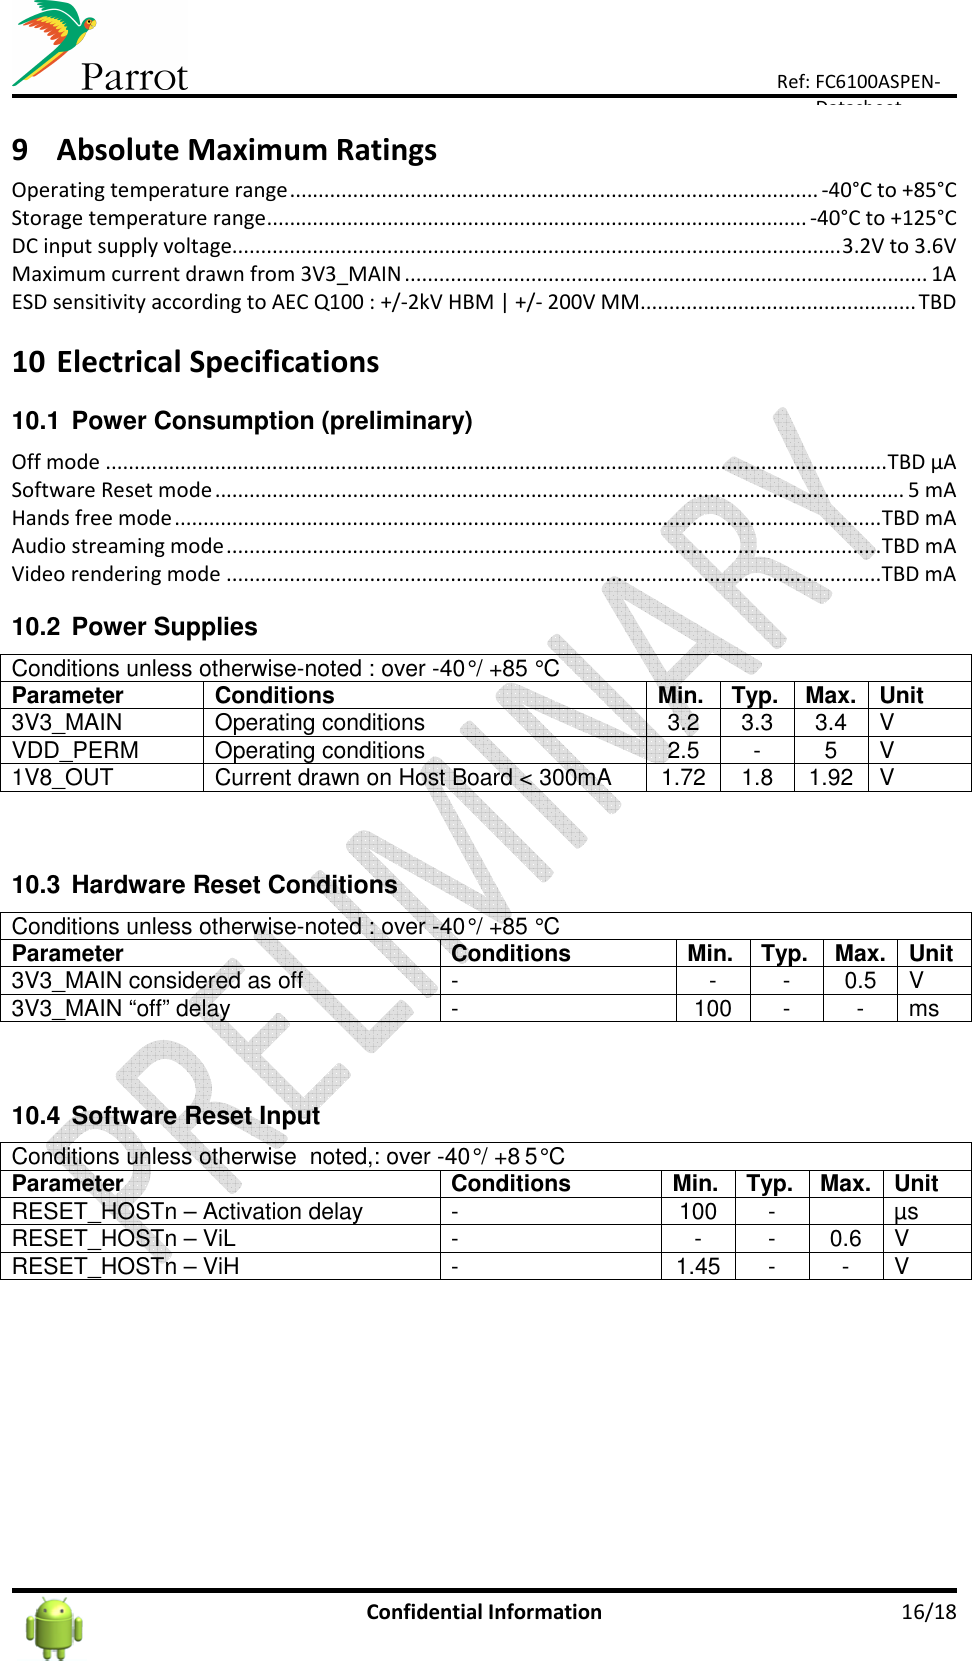      Confidential Information  16/18 Ref: FC6100ASPEN-Datasheet 9 Absolute Maximum Ratings Operating temperature range ............................................................................................ -40°C to +85°C Storage temperature range .............................................................................................. -40°C to +125°C DC input supply voltage.......................................................................................................... 3.2V to 3.6V Maximum current drawn from 3V3_MAIN ........................................................................................... 1A ESD sensitivity according to AEC Q100 : +/-2kV HBM | +/- 200V MM ................................................ TBD  10 Electrical Specifications 10.1  Power Consumption (preliminary) Off mode ........................................................................................................................................ TBD µA Software Reset mode ........................................................................................................................ 5 mA Hands free mode ........................................................................................................................... TBD mA Audio streaming mode .................................................................................................................. TBD mA Video rendering mode .................................................................................................................. TBD mA  10.2  Power Supplies Conditions unless otherwise-noted : over -40° / +85 ° C  Parameter Conditions Min. Typ. Max. Unit 3V3_MAIN  Operating conditions  3.2  3.3  3.4  V VDD_PERM  Operating conditions  2.5  -  5  V 1V8_OUT  Current drawn on Host Board &lt; 300mA  1.72  1.8  1.92  V  10.3  Hardware Reset Conditions Conditions unless otherwise-noted : over -40° / +85 ° C Parameter Conditions Min. Typ. Max. Unit 3V3_MAIN considered as off  -  -  -  0.5  V 3V3_MAIN “off” delay  -  100  -  -  ms  10.4  Software Reset Input Conditions unless otherwise  noted,: over -40° / +8 5° C Parameter Conditions Min. Typ. Max. Unit RESET_HOSTn – Activation delay  -  100  -    µs RESET_HOSTn – ViL   -  -  -  0.6  V RESET_HOSTn – ViH  -  1.45  -  -  V    